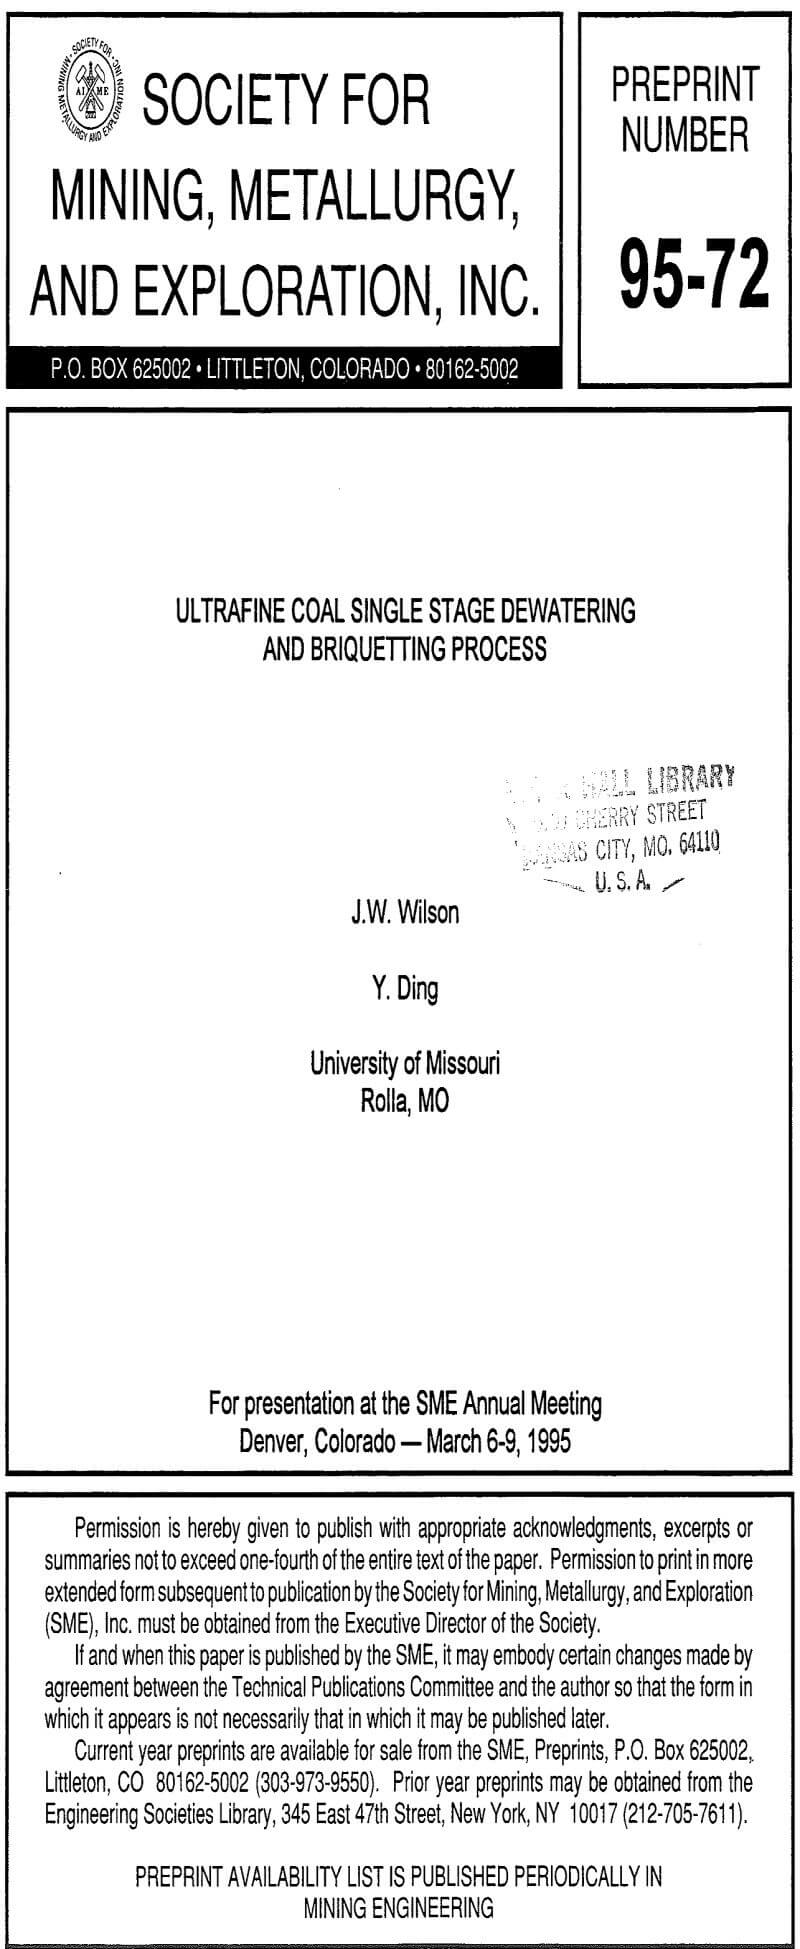 ultrafine coal single stage dewatering and briquetting process